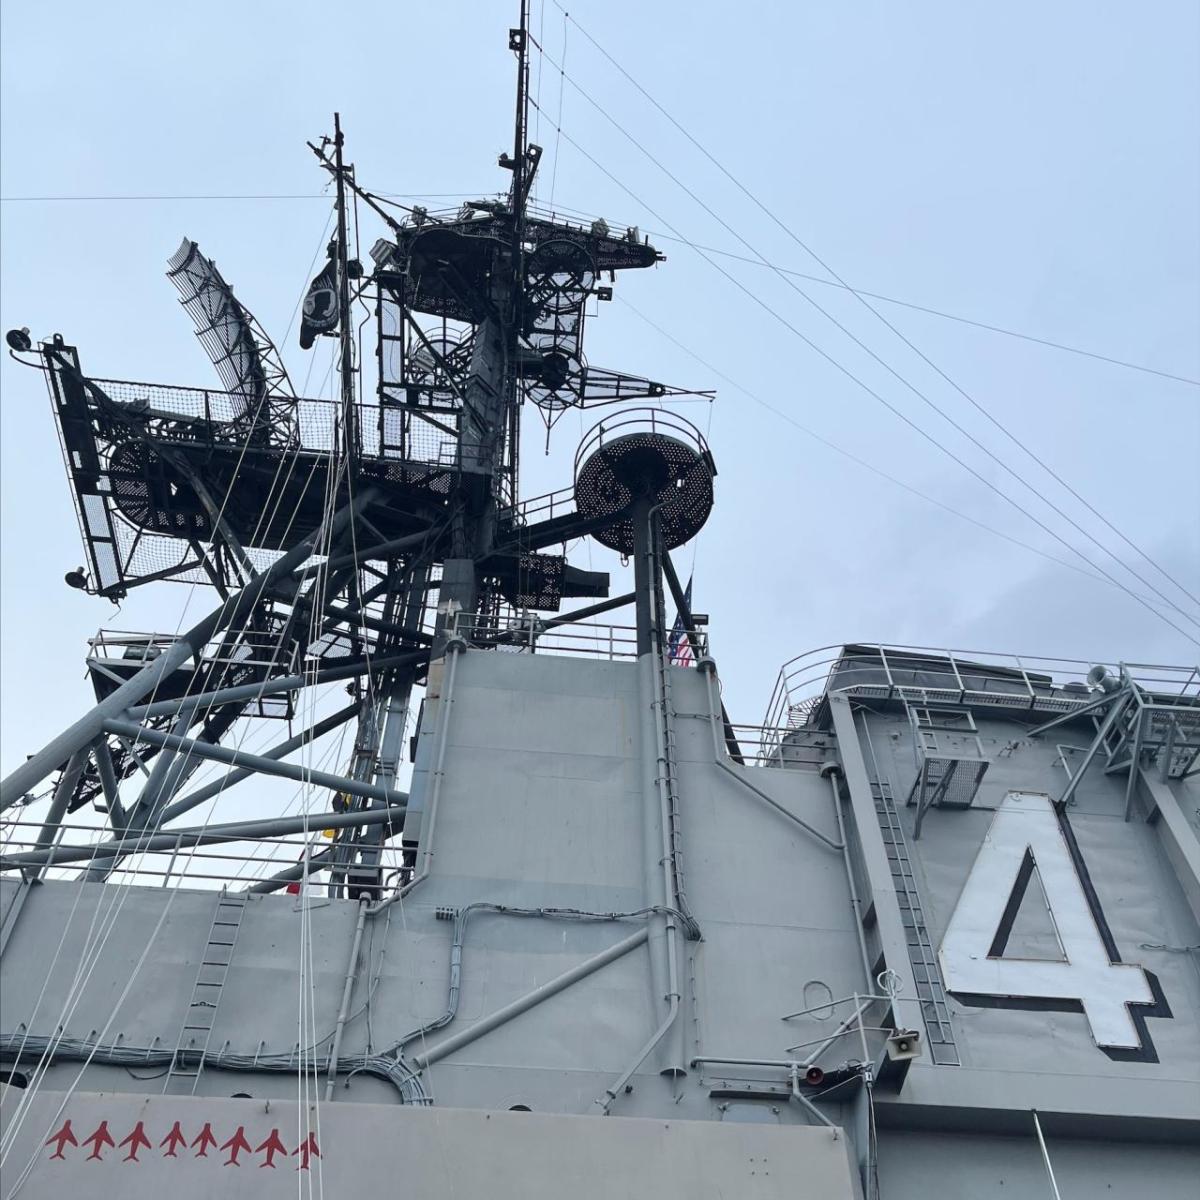 Looking up to a high part on a military ship.